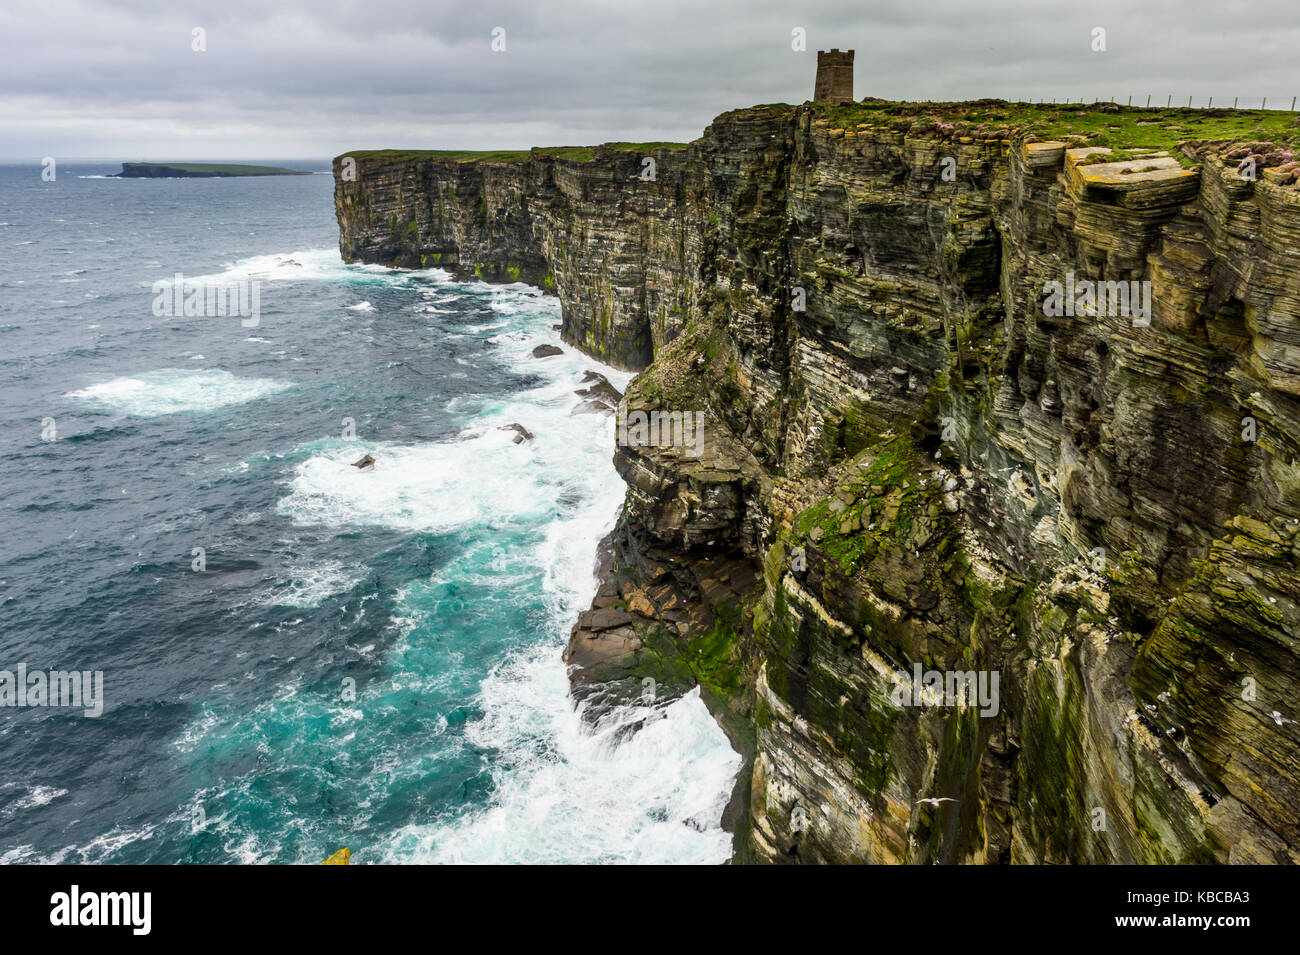 High above the cliffs, the Kitchener Memorial, Orkney Islands, Scotland, United Kingdom, Europe Stock Photo